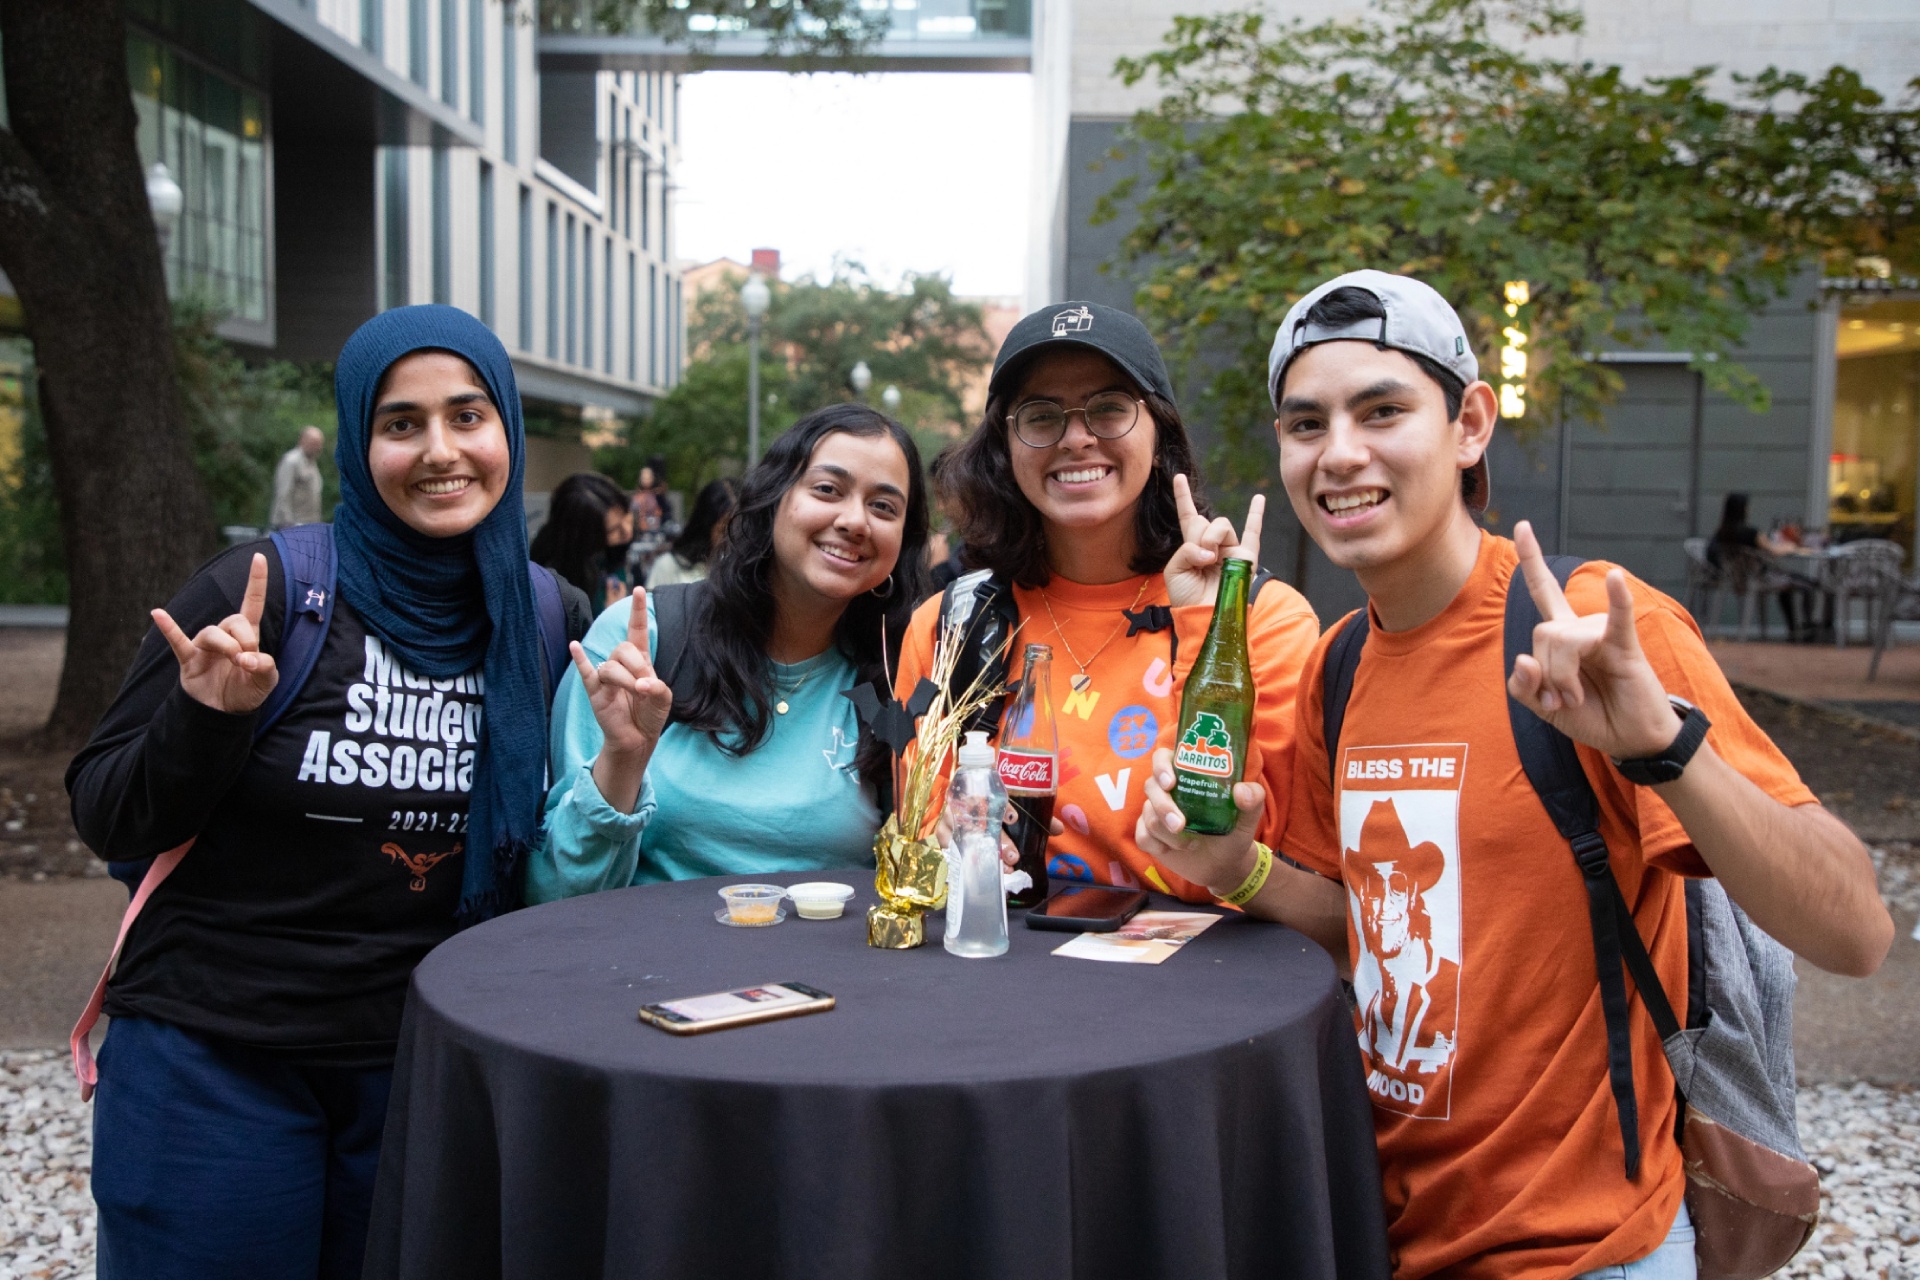 Four students standing around a table showing hookem signs with their hands and smiling